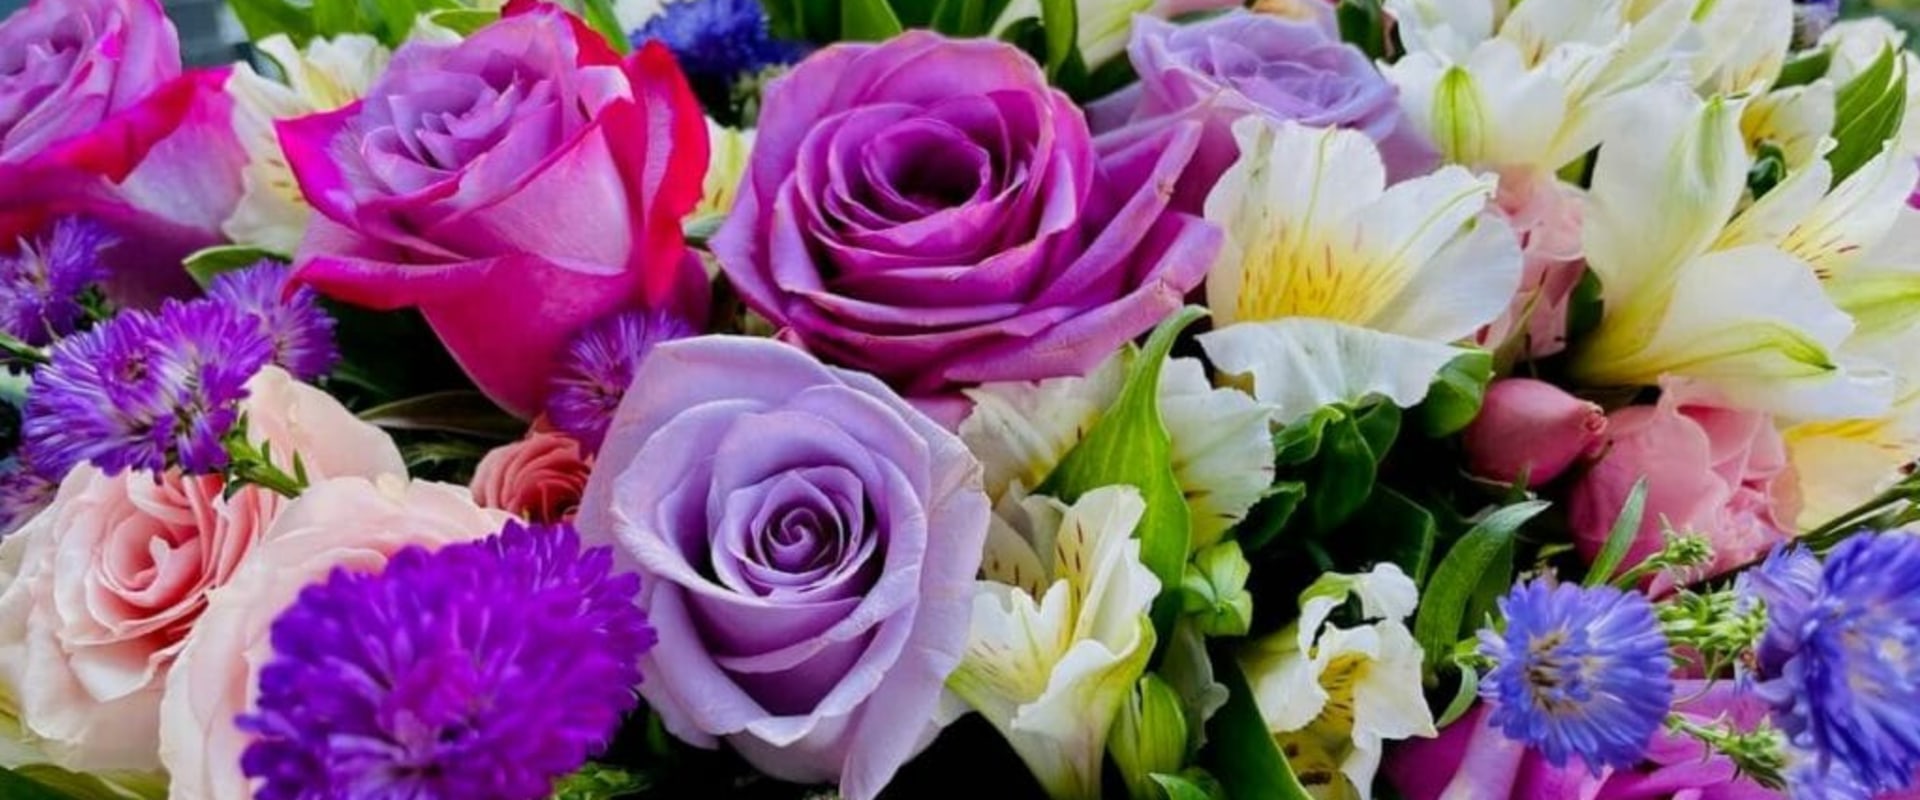 Order Flowers Online from Oklahoma City Florists - A Guide